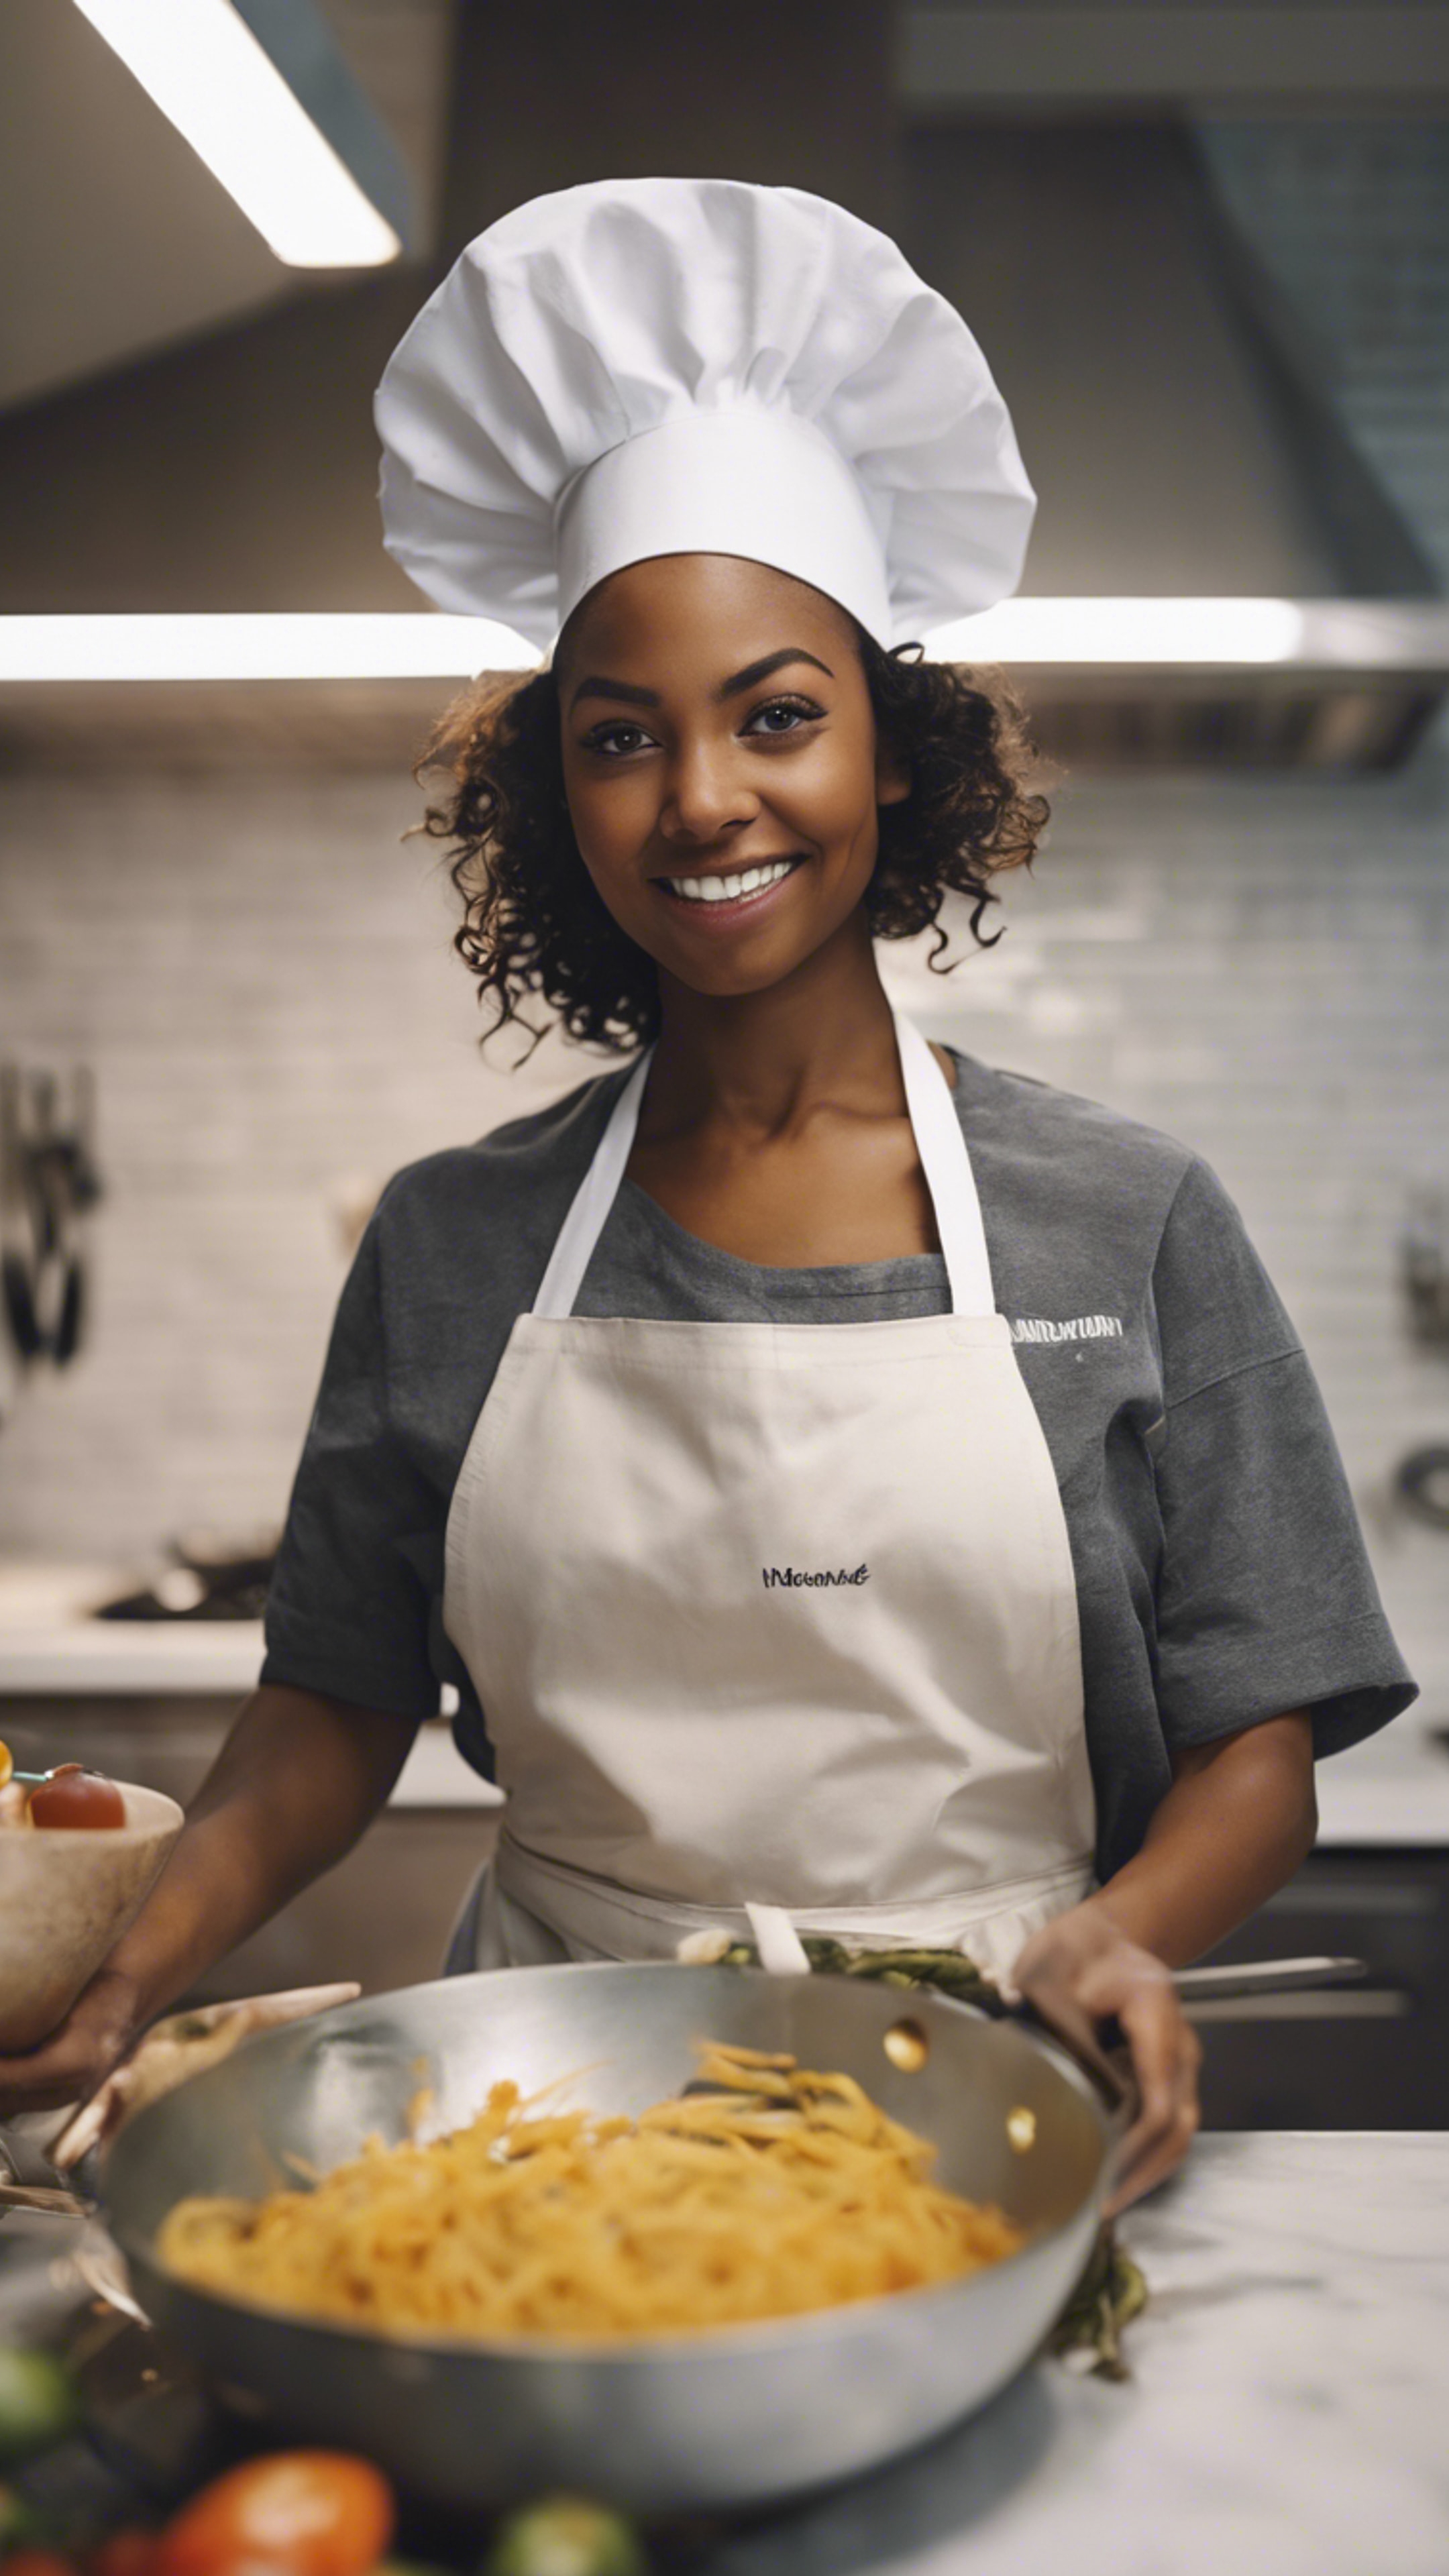 An enthusiastic black girl wearing chef’s hat and apron cooking in a modern kitchen.壁紙[28127f79c89b4e3a826e]